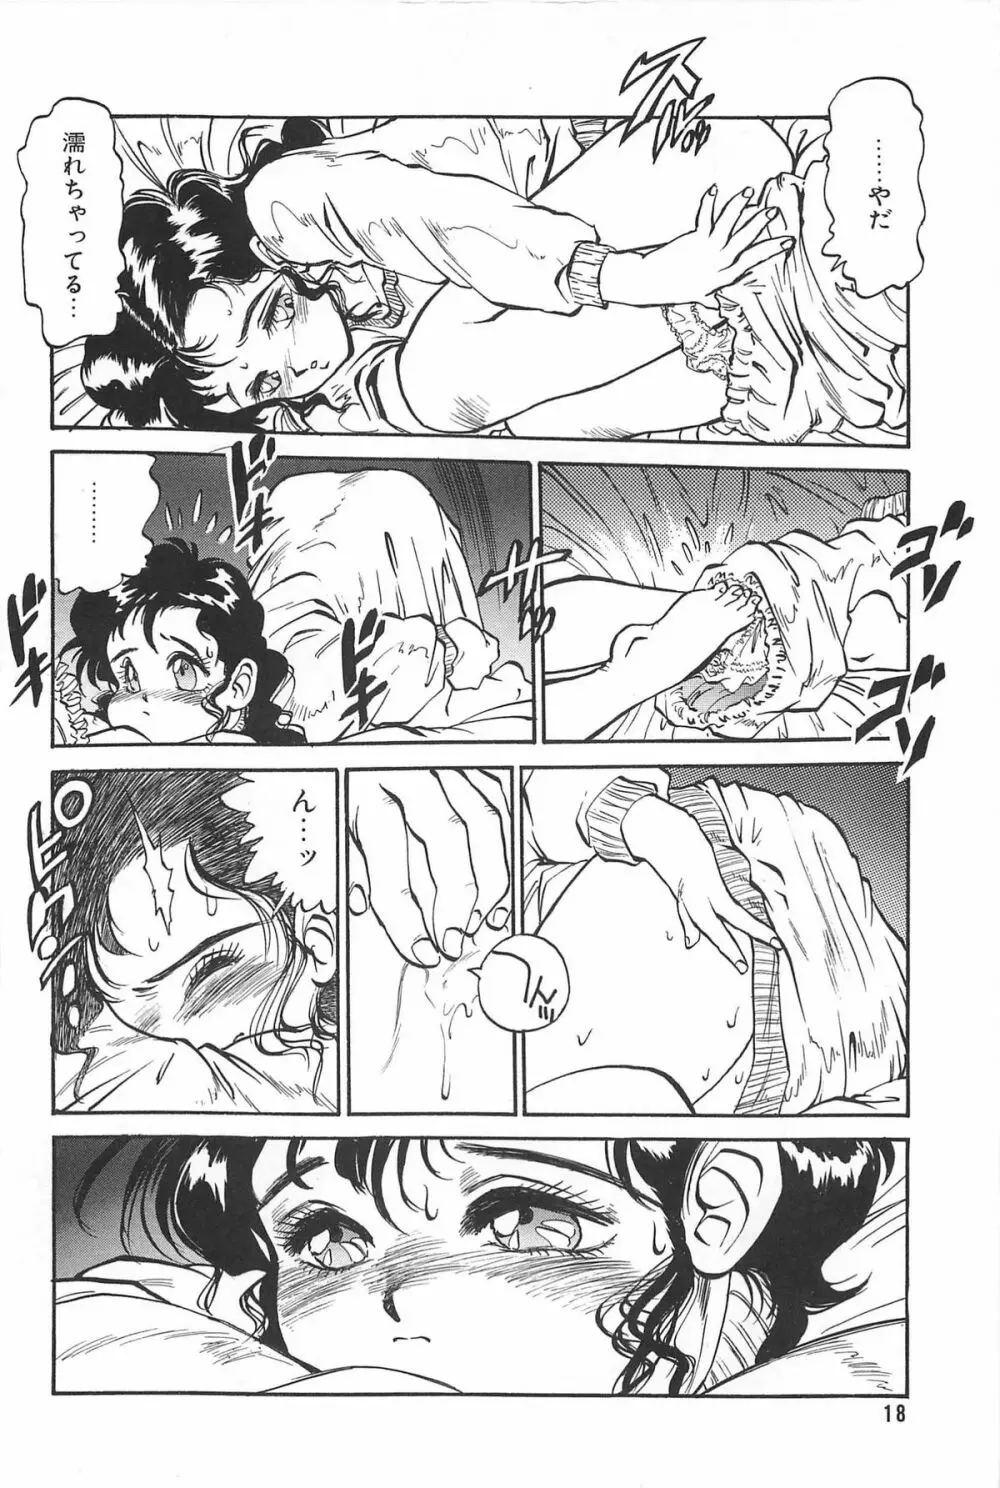 LOVE ME 1995 Page.20